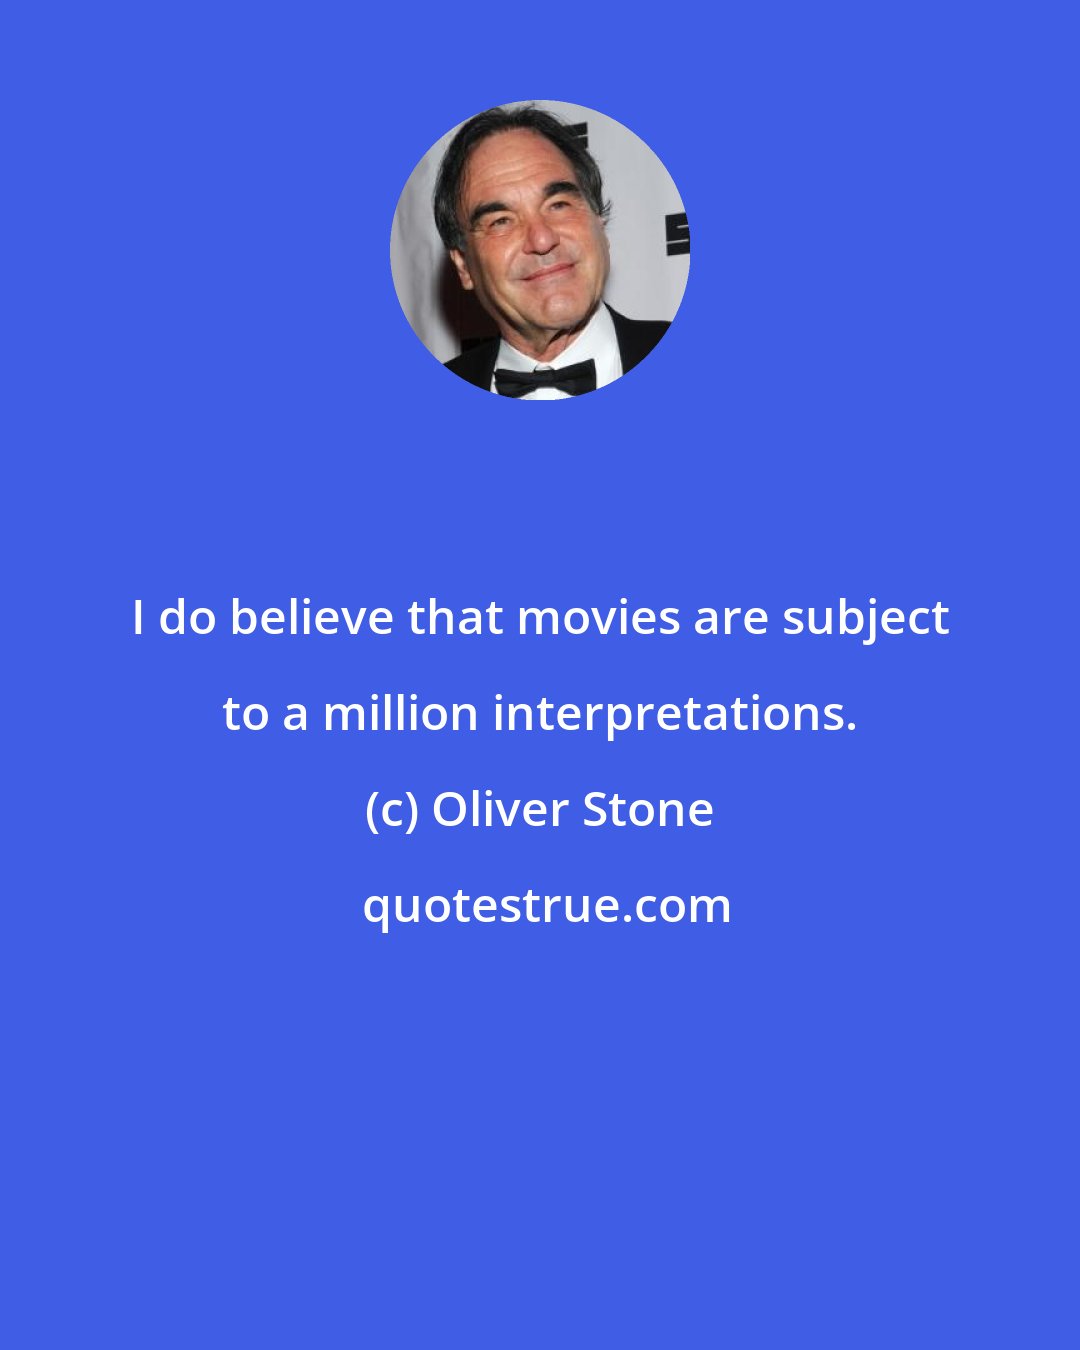 Oliver Stone: I do believe that movies are subject to a million interpretations.